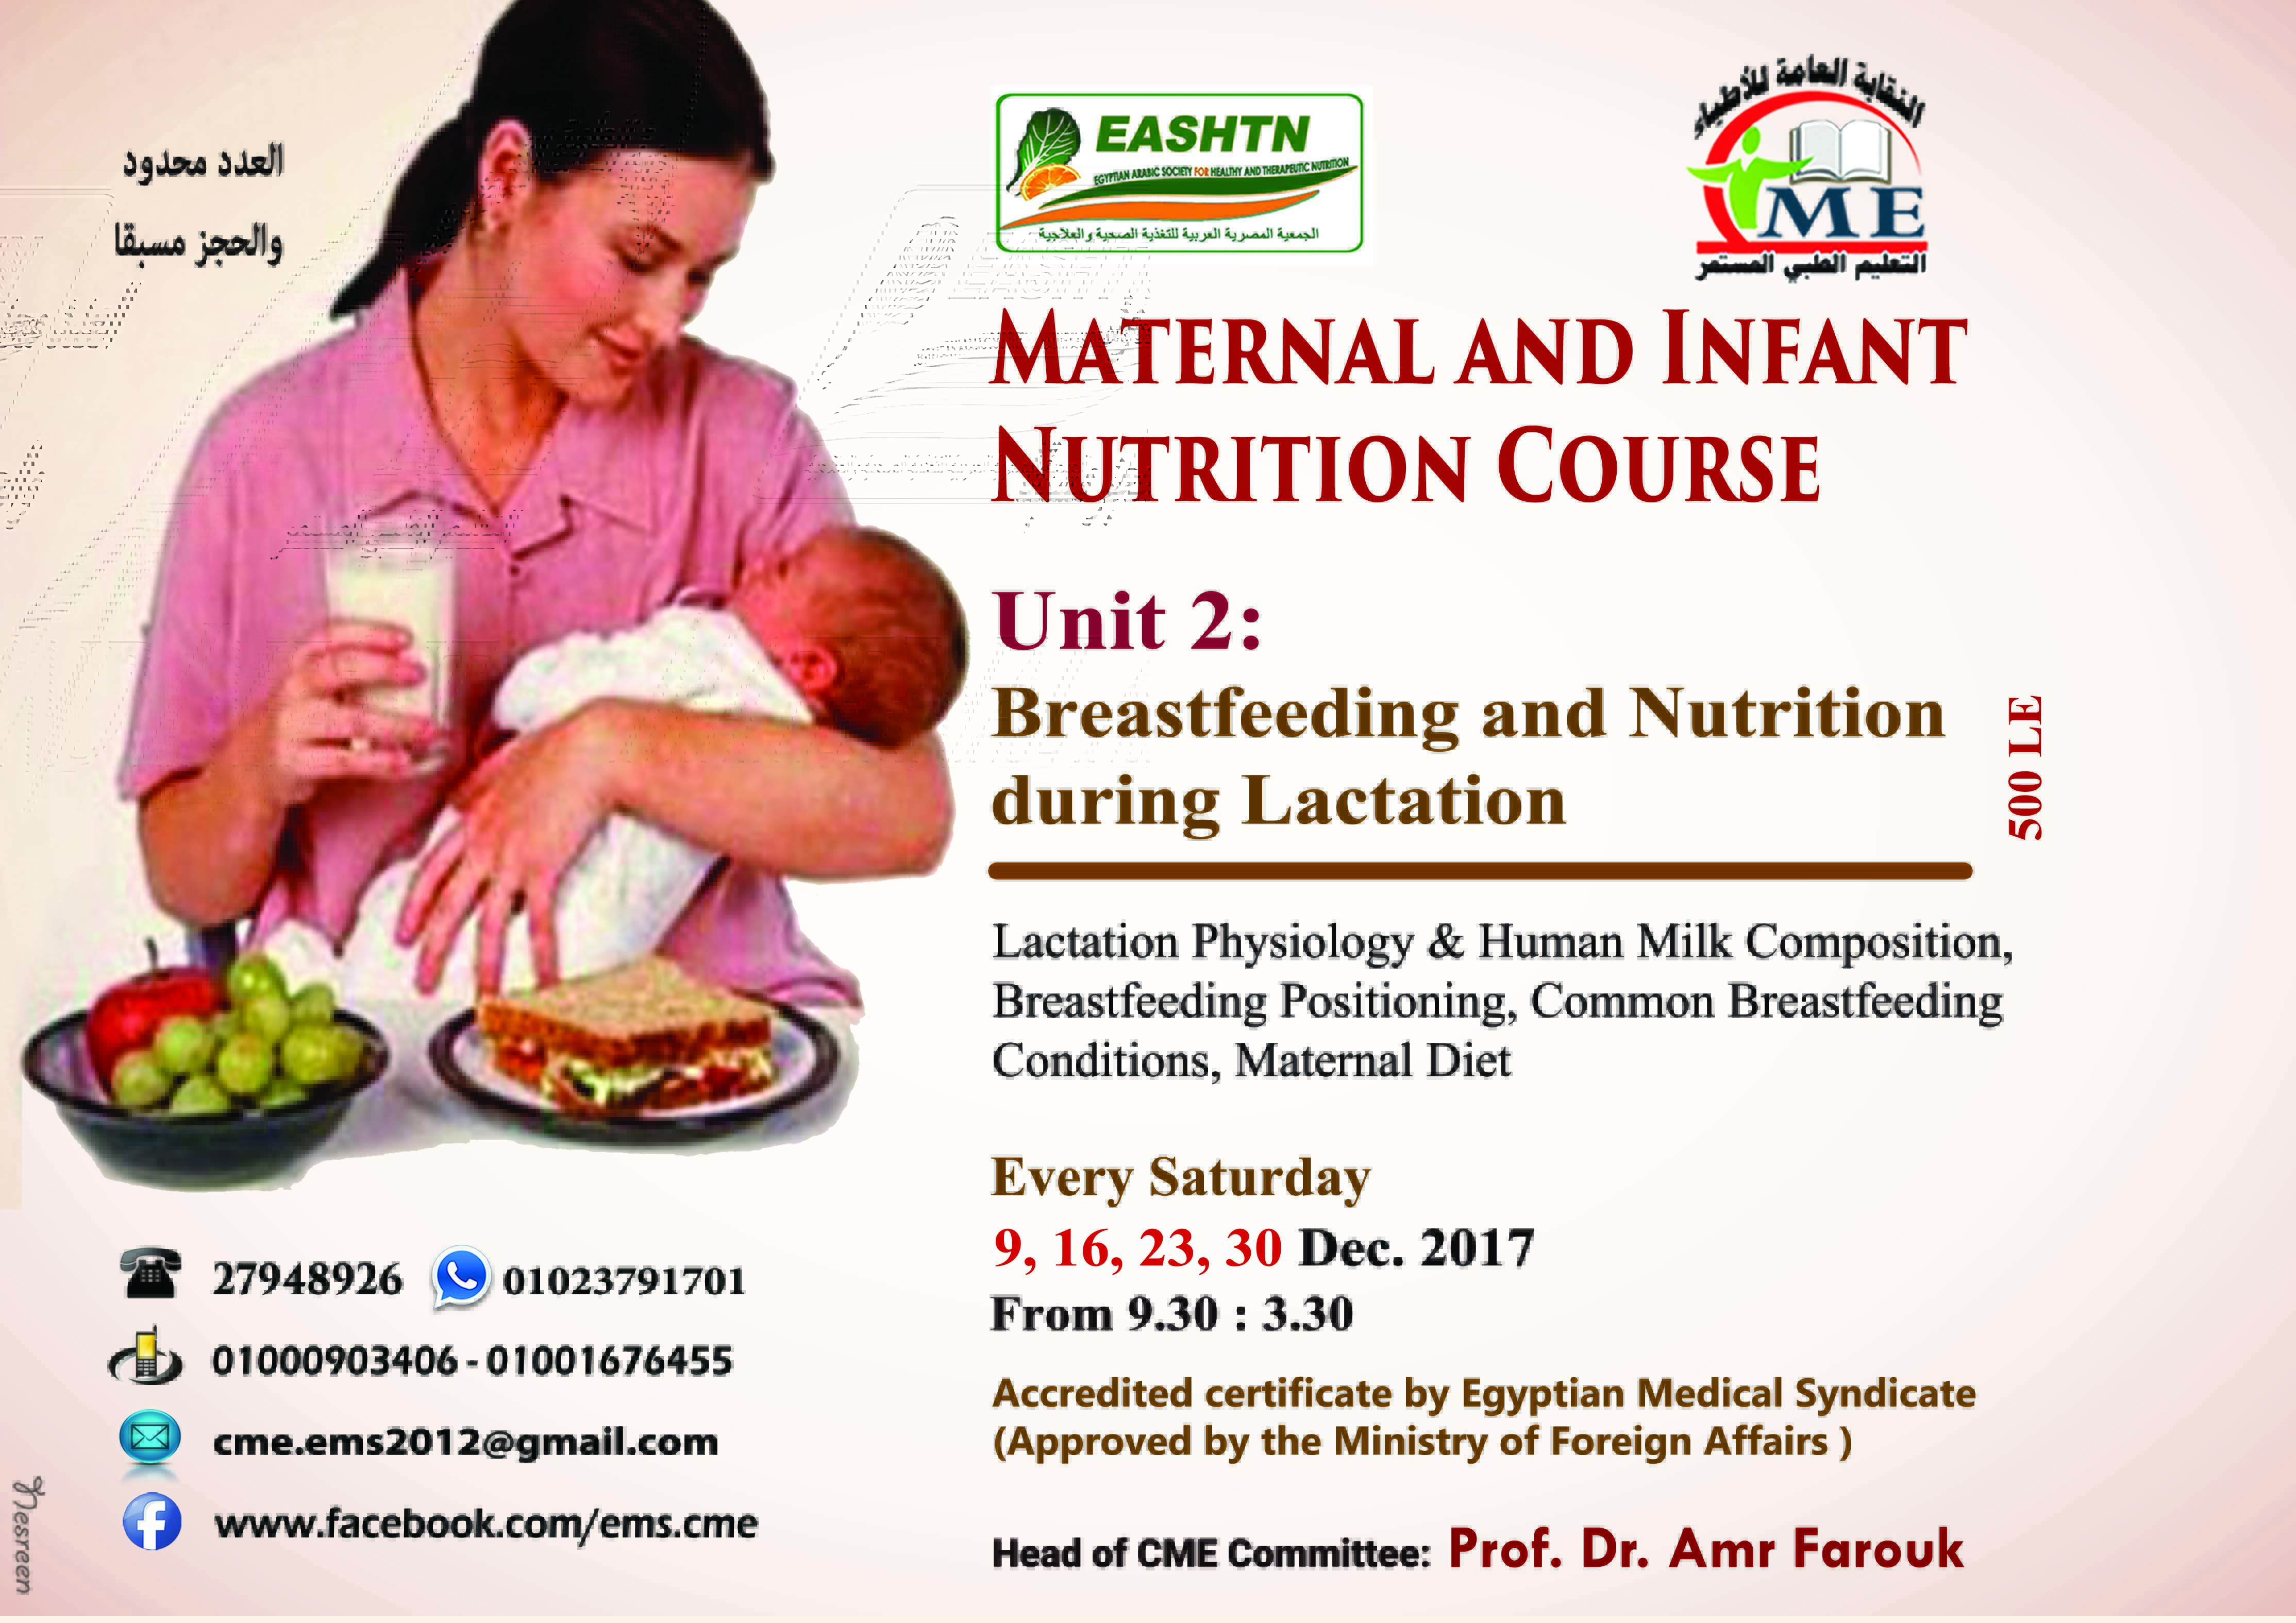 Breastfeeding and Nutrition during Lactation